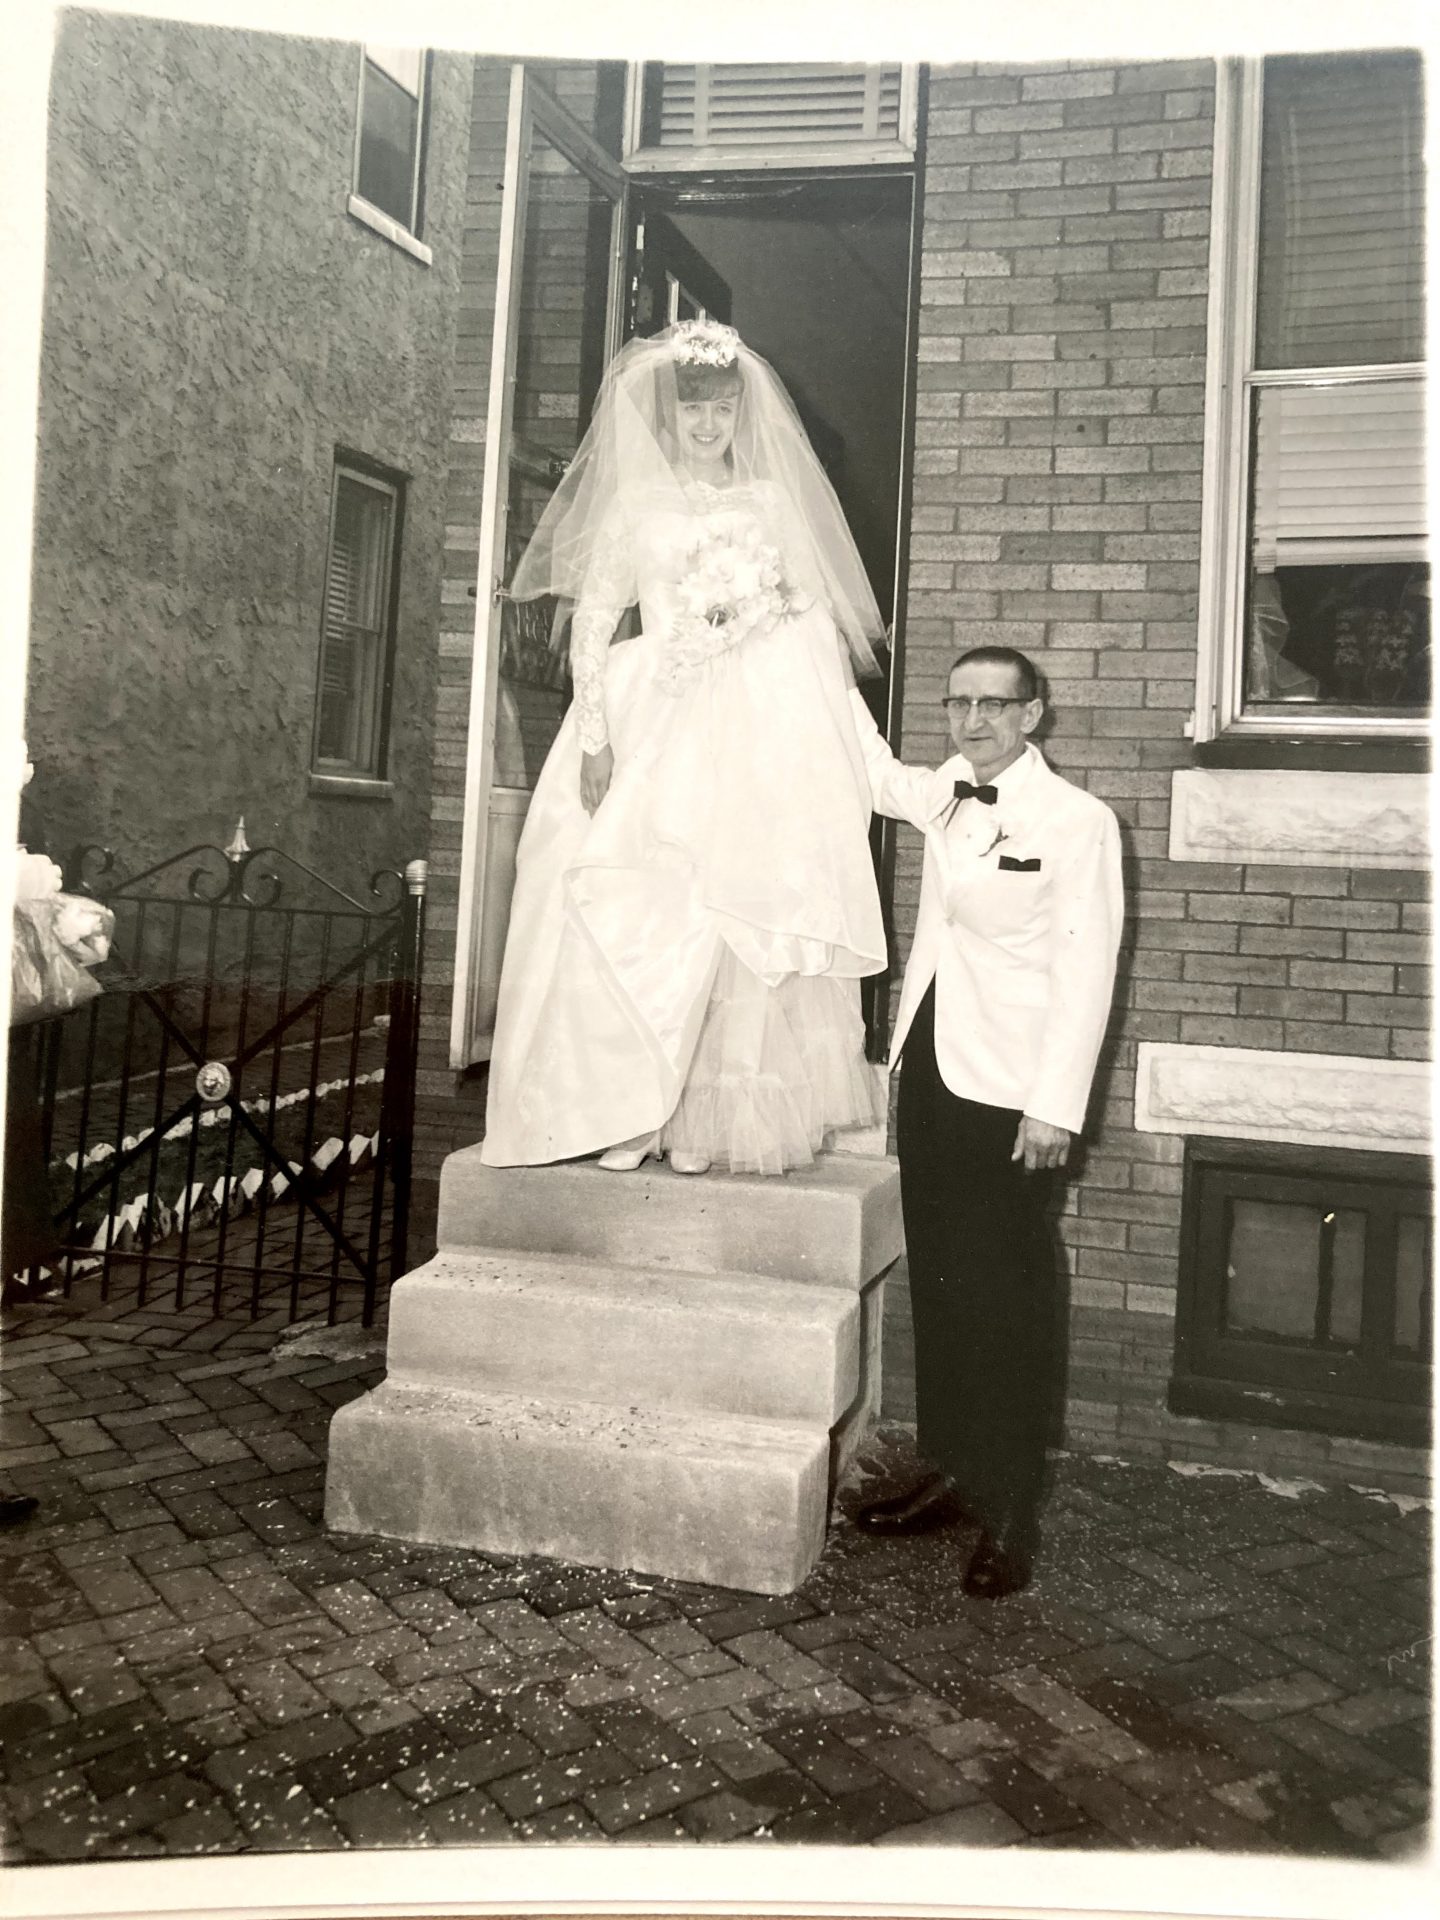 Charlotte and her father, John Karolczak, on her wedding day.